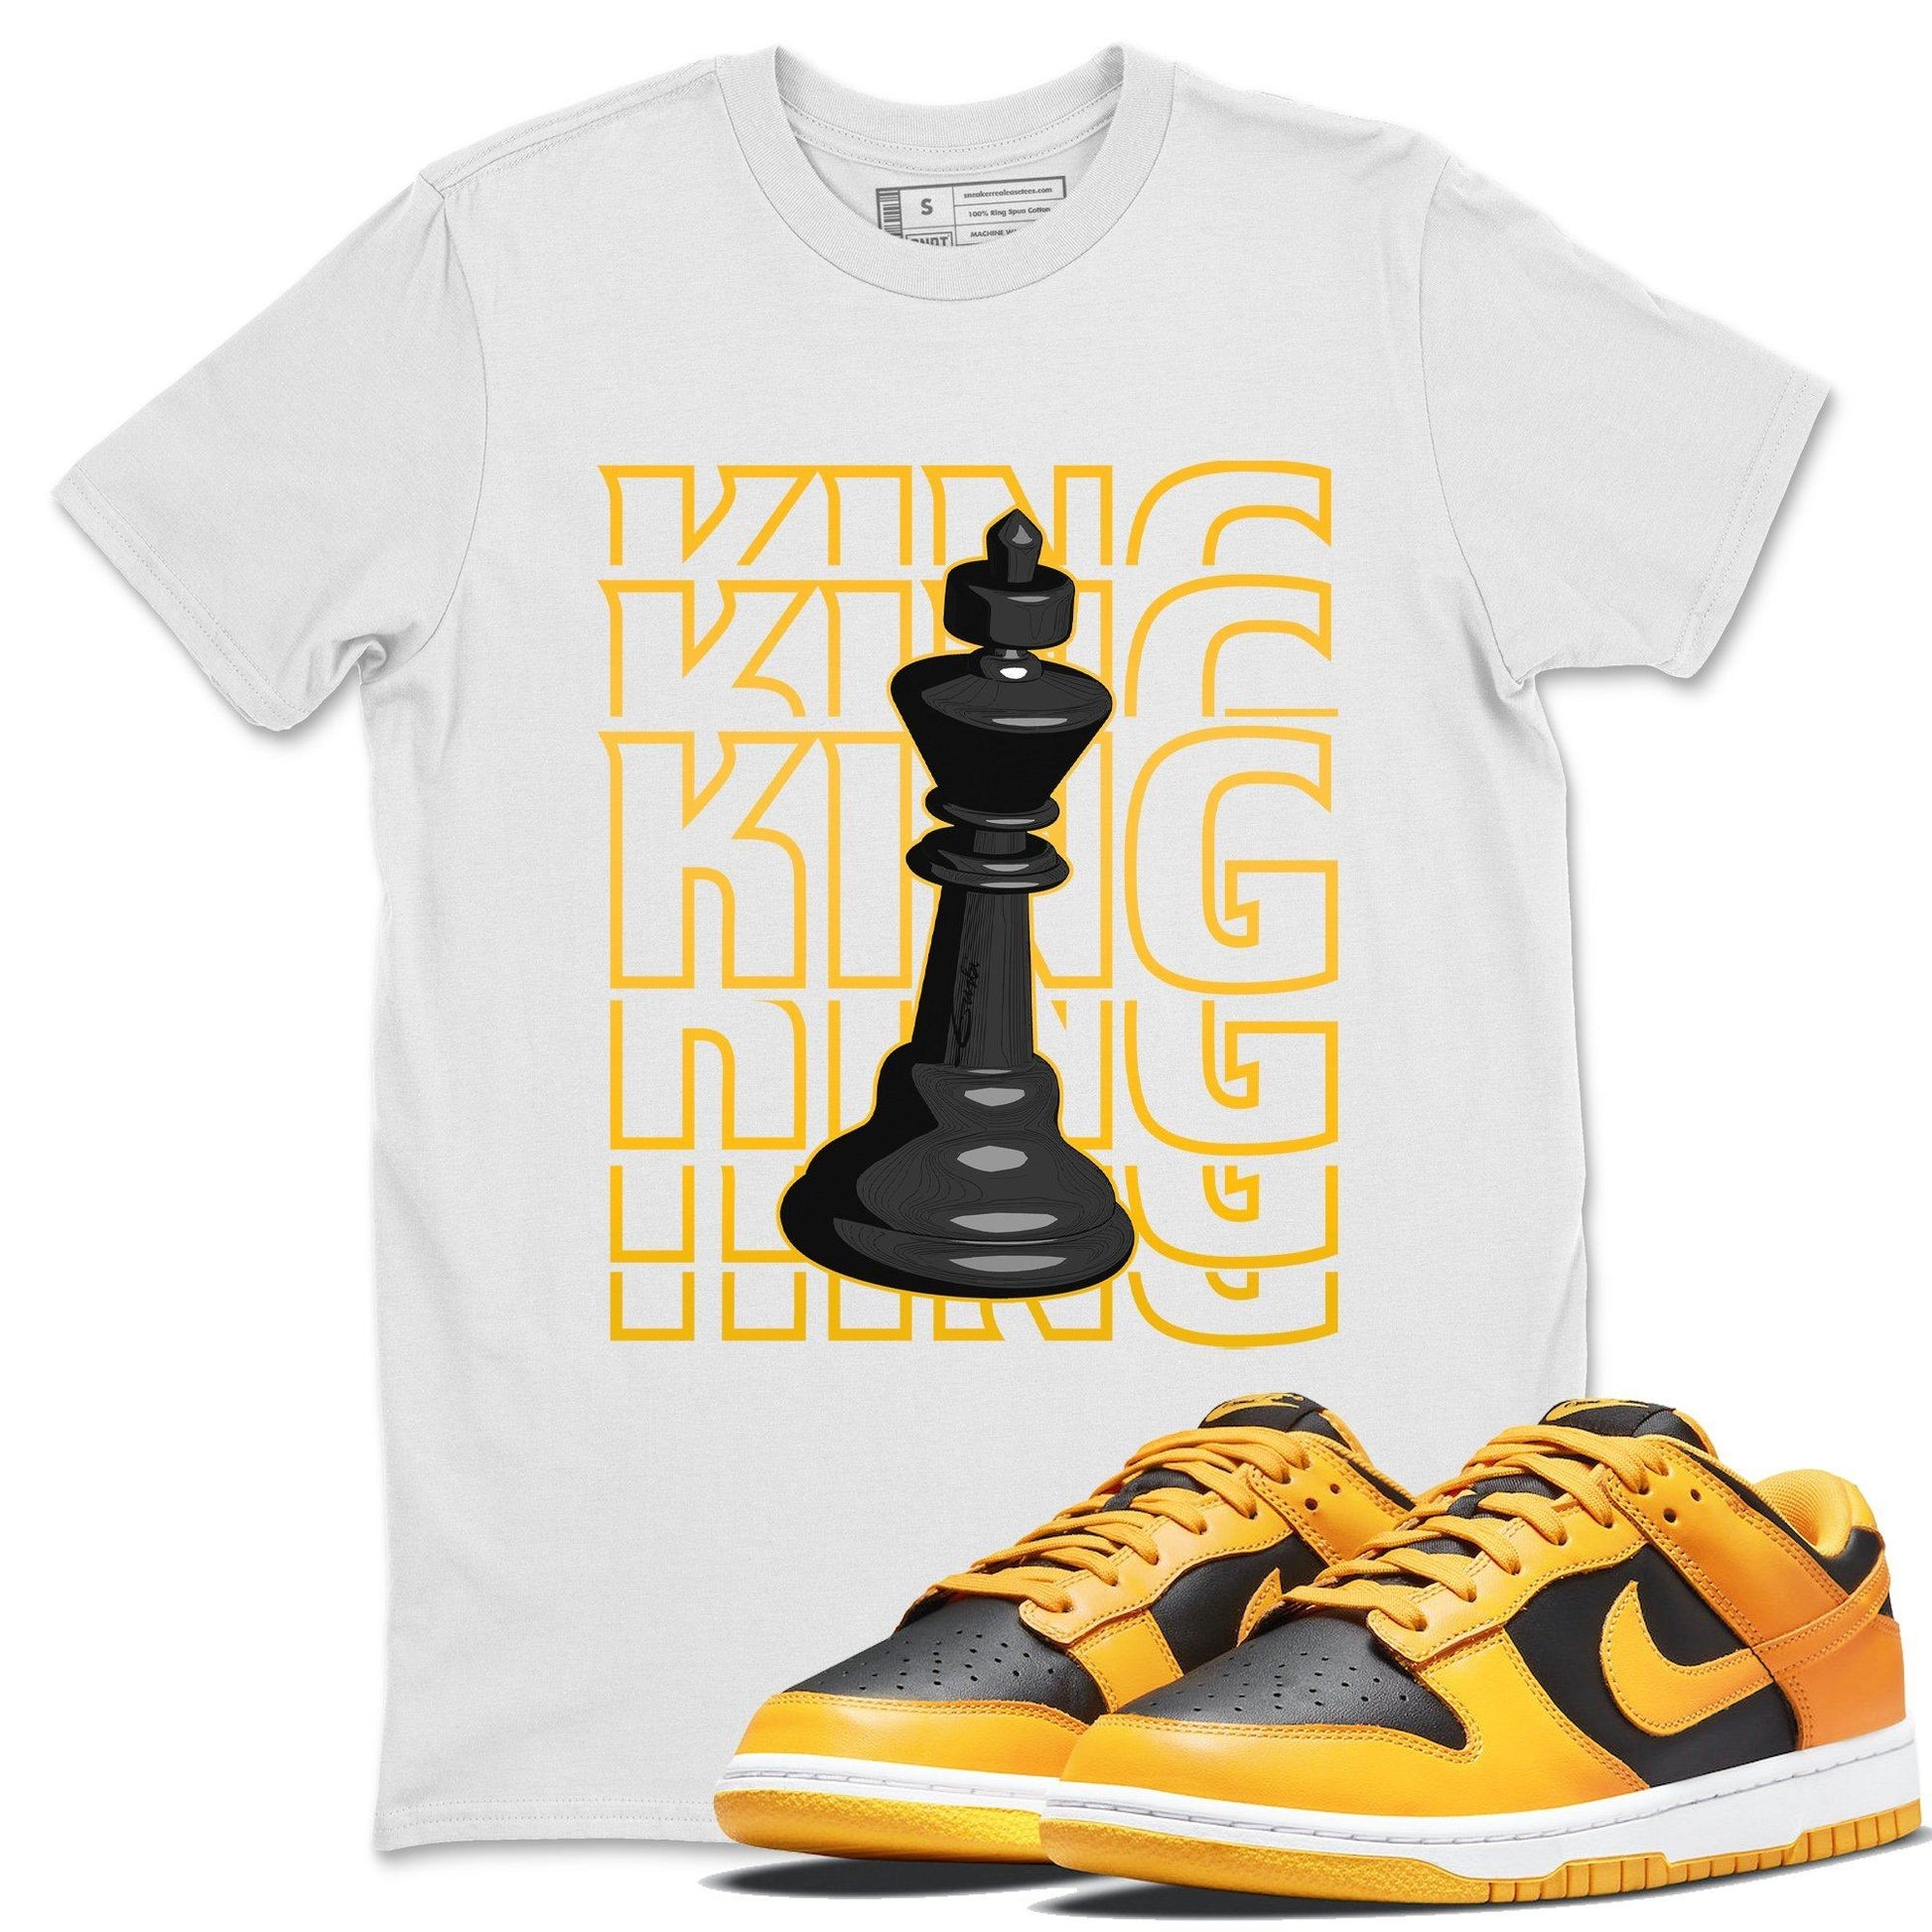 Dunk Championship Goldenrod Sneaker Match Tees King Sneaker Tees Dunk Championship Goldenrod Sneaker Release Tees Unisex Shirts